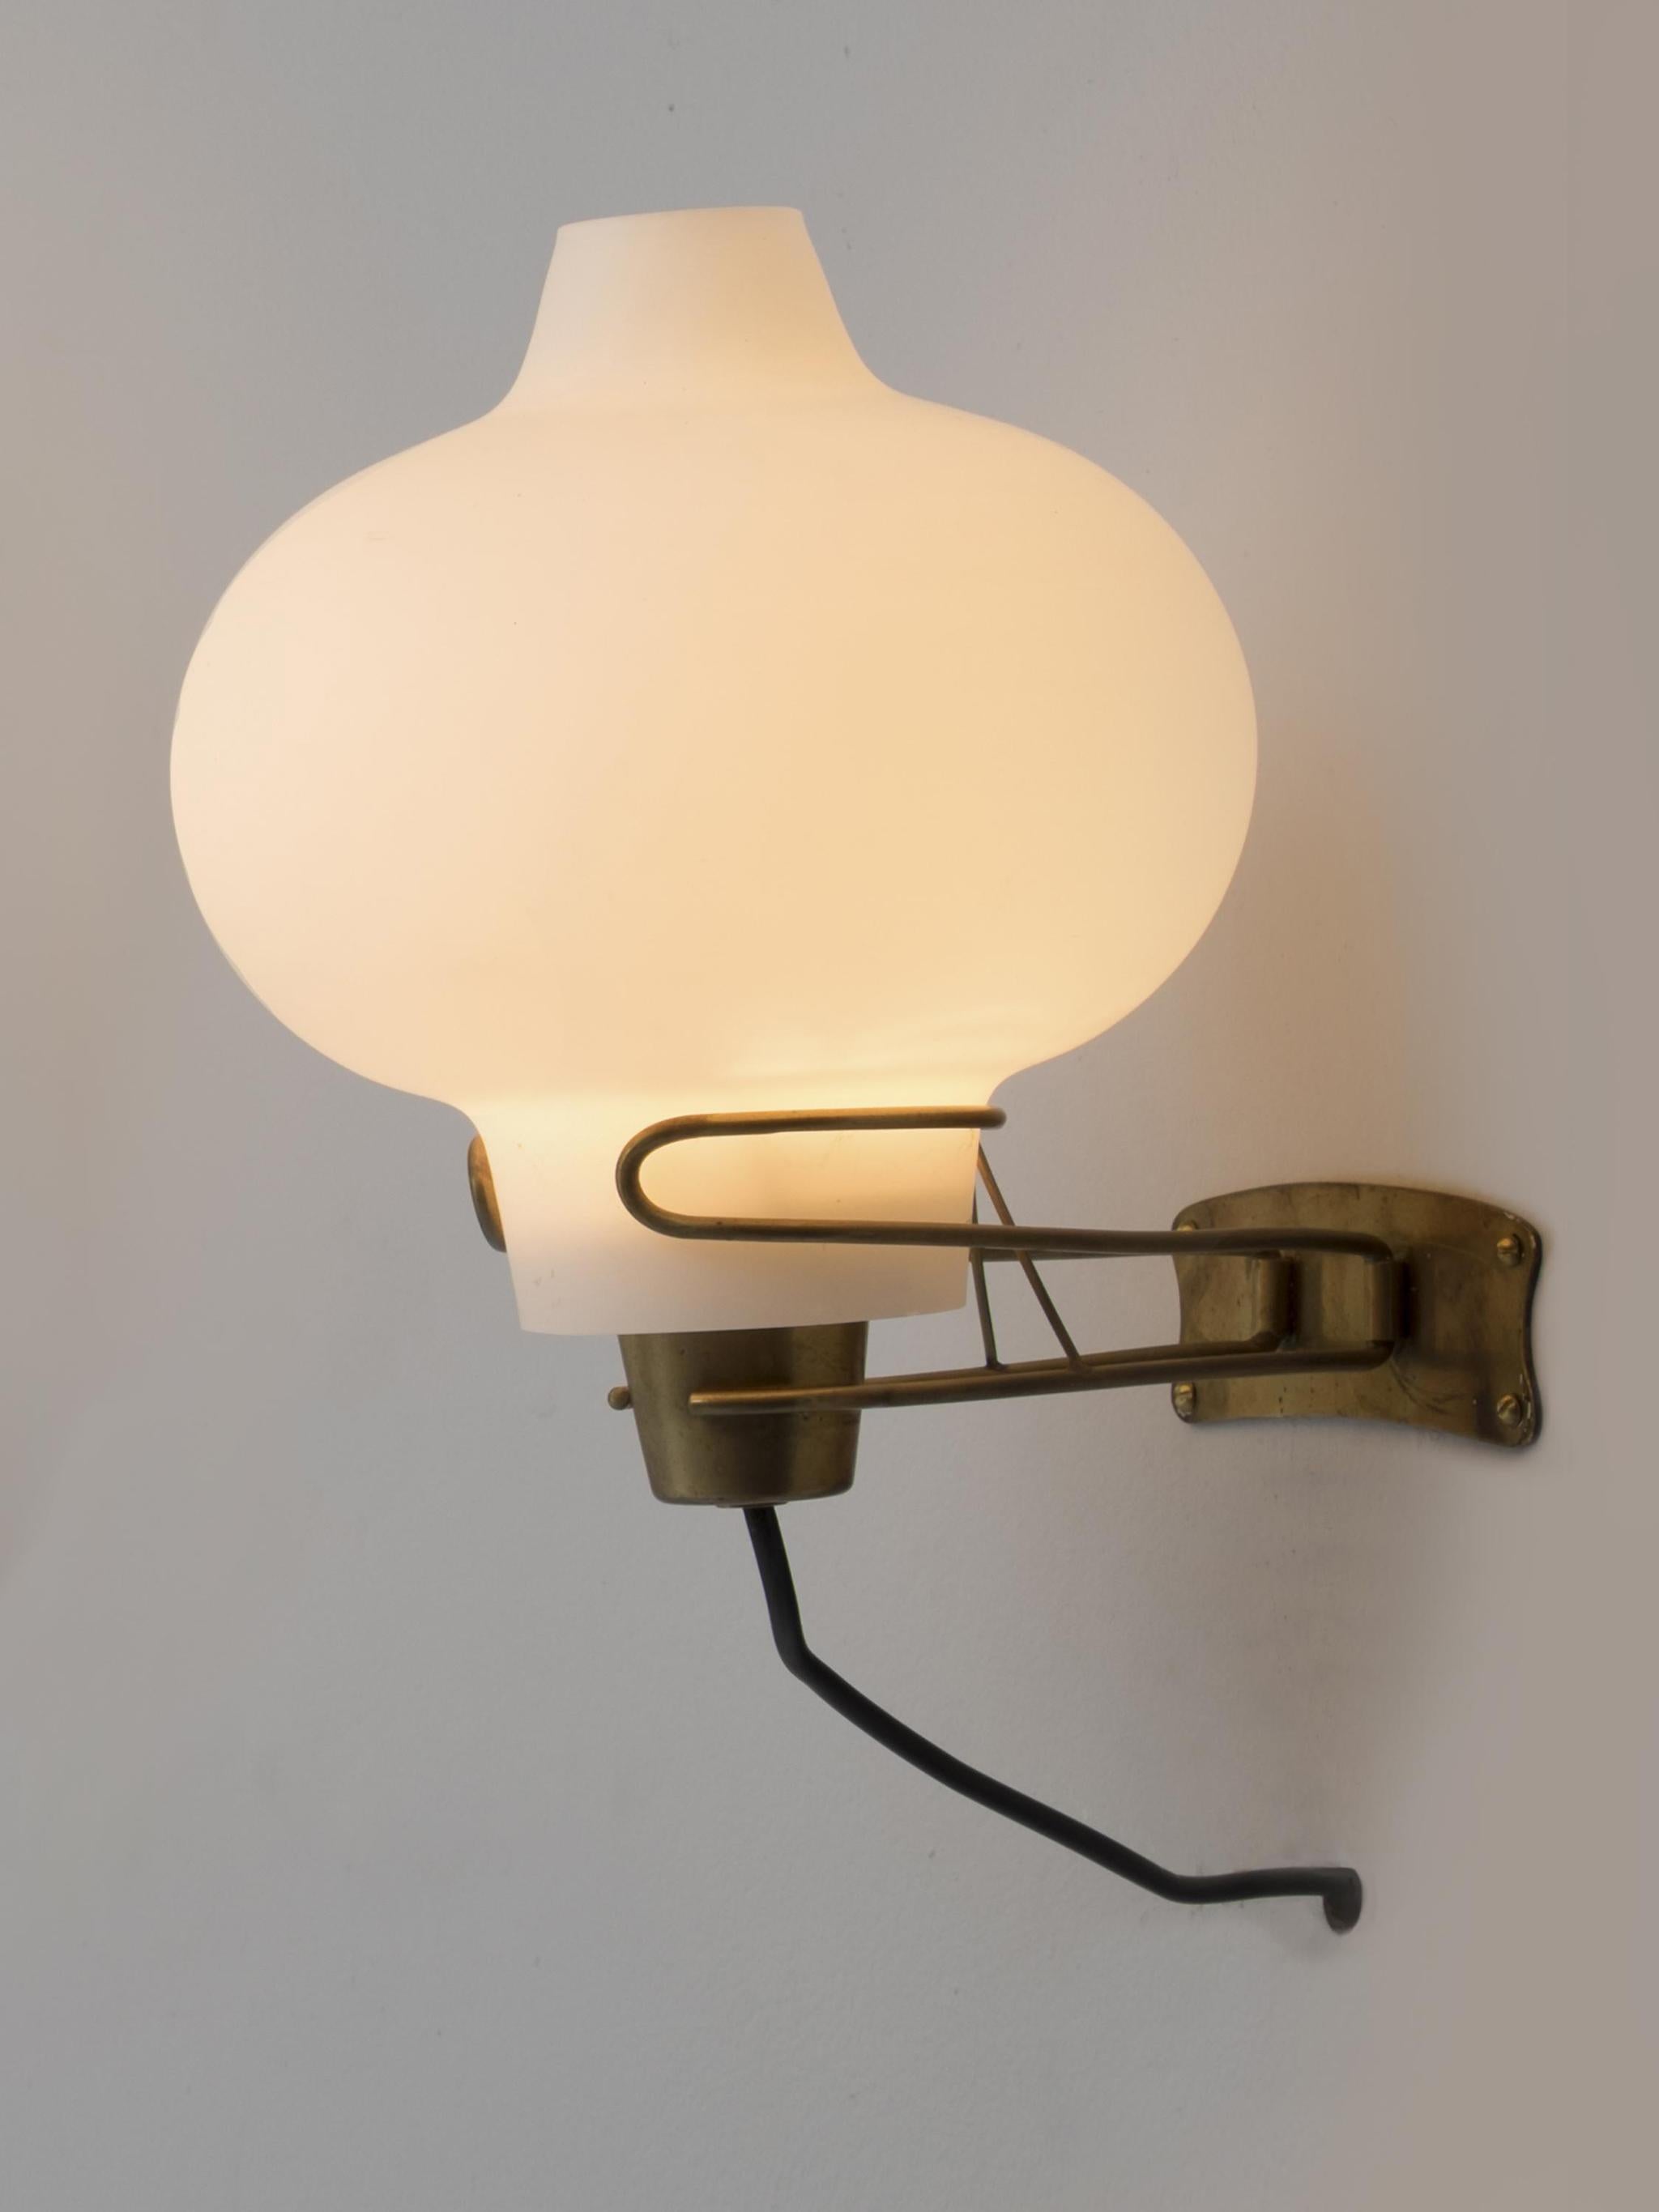 Bent Karlby, wall light, Opaline glass, metal and brass, Denmark, 1960s.

Elegant Danish wall light with Opaline shade. The glass onion shaped shade provides a warm and natural light partition. Accompanied with a wall-mounted solid brass holder